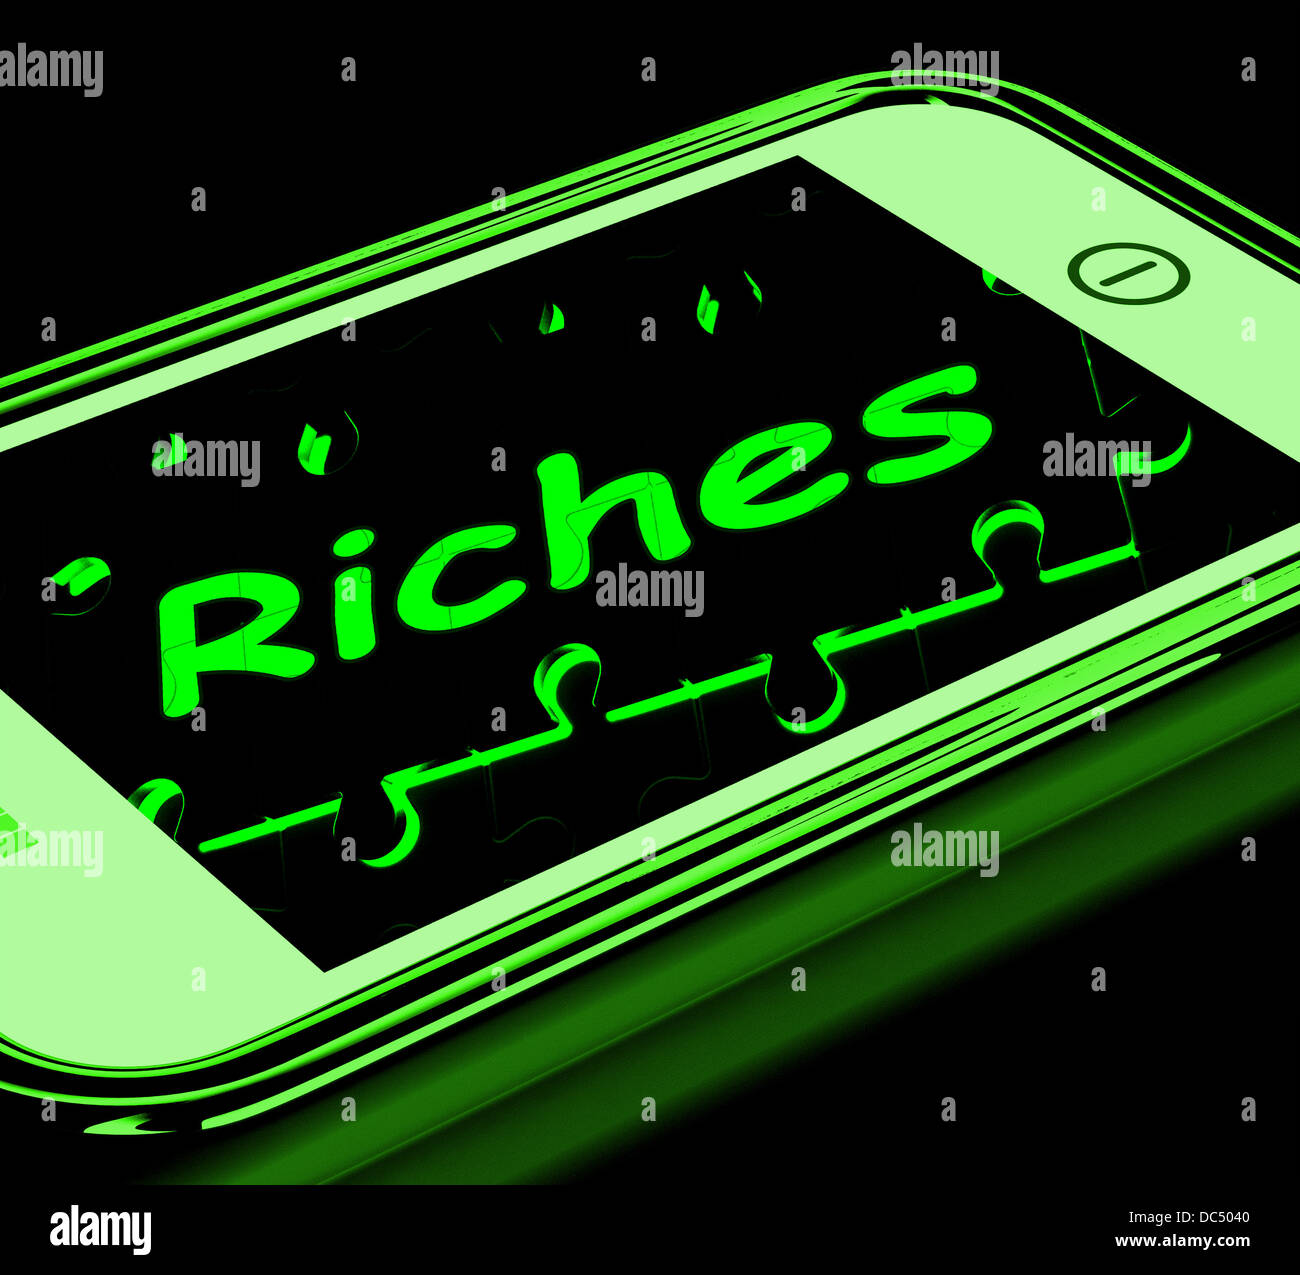 Riches On Smartphone Showing Wealth Stock Photo